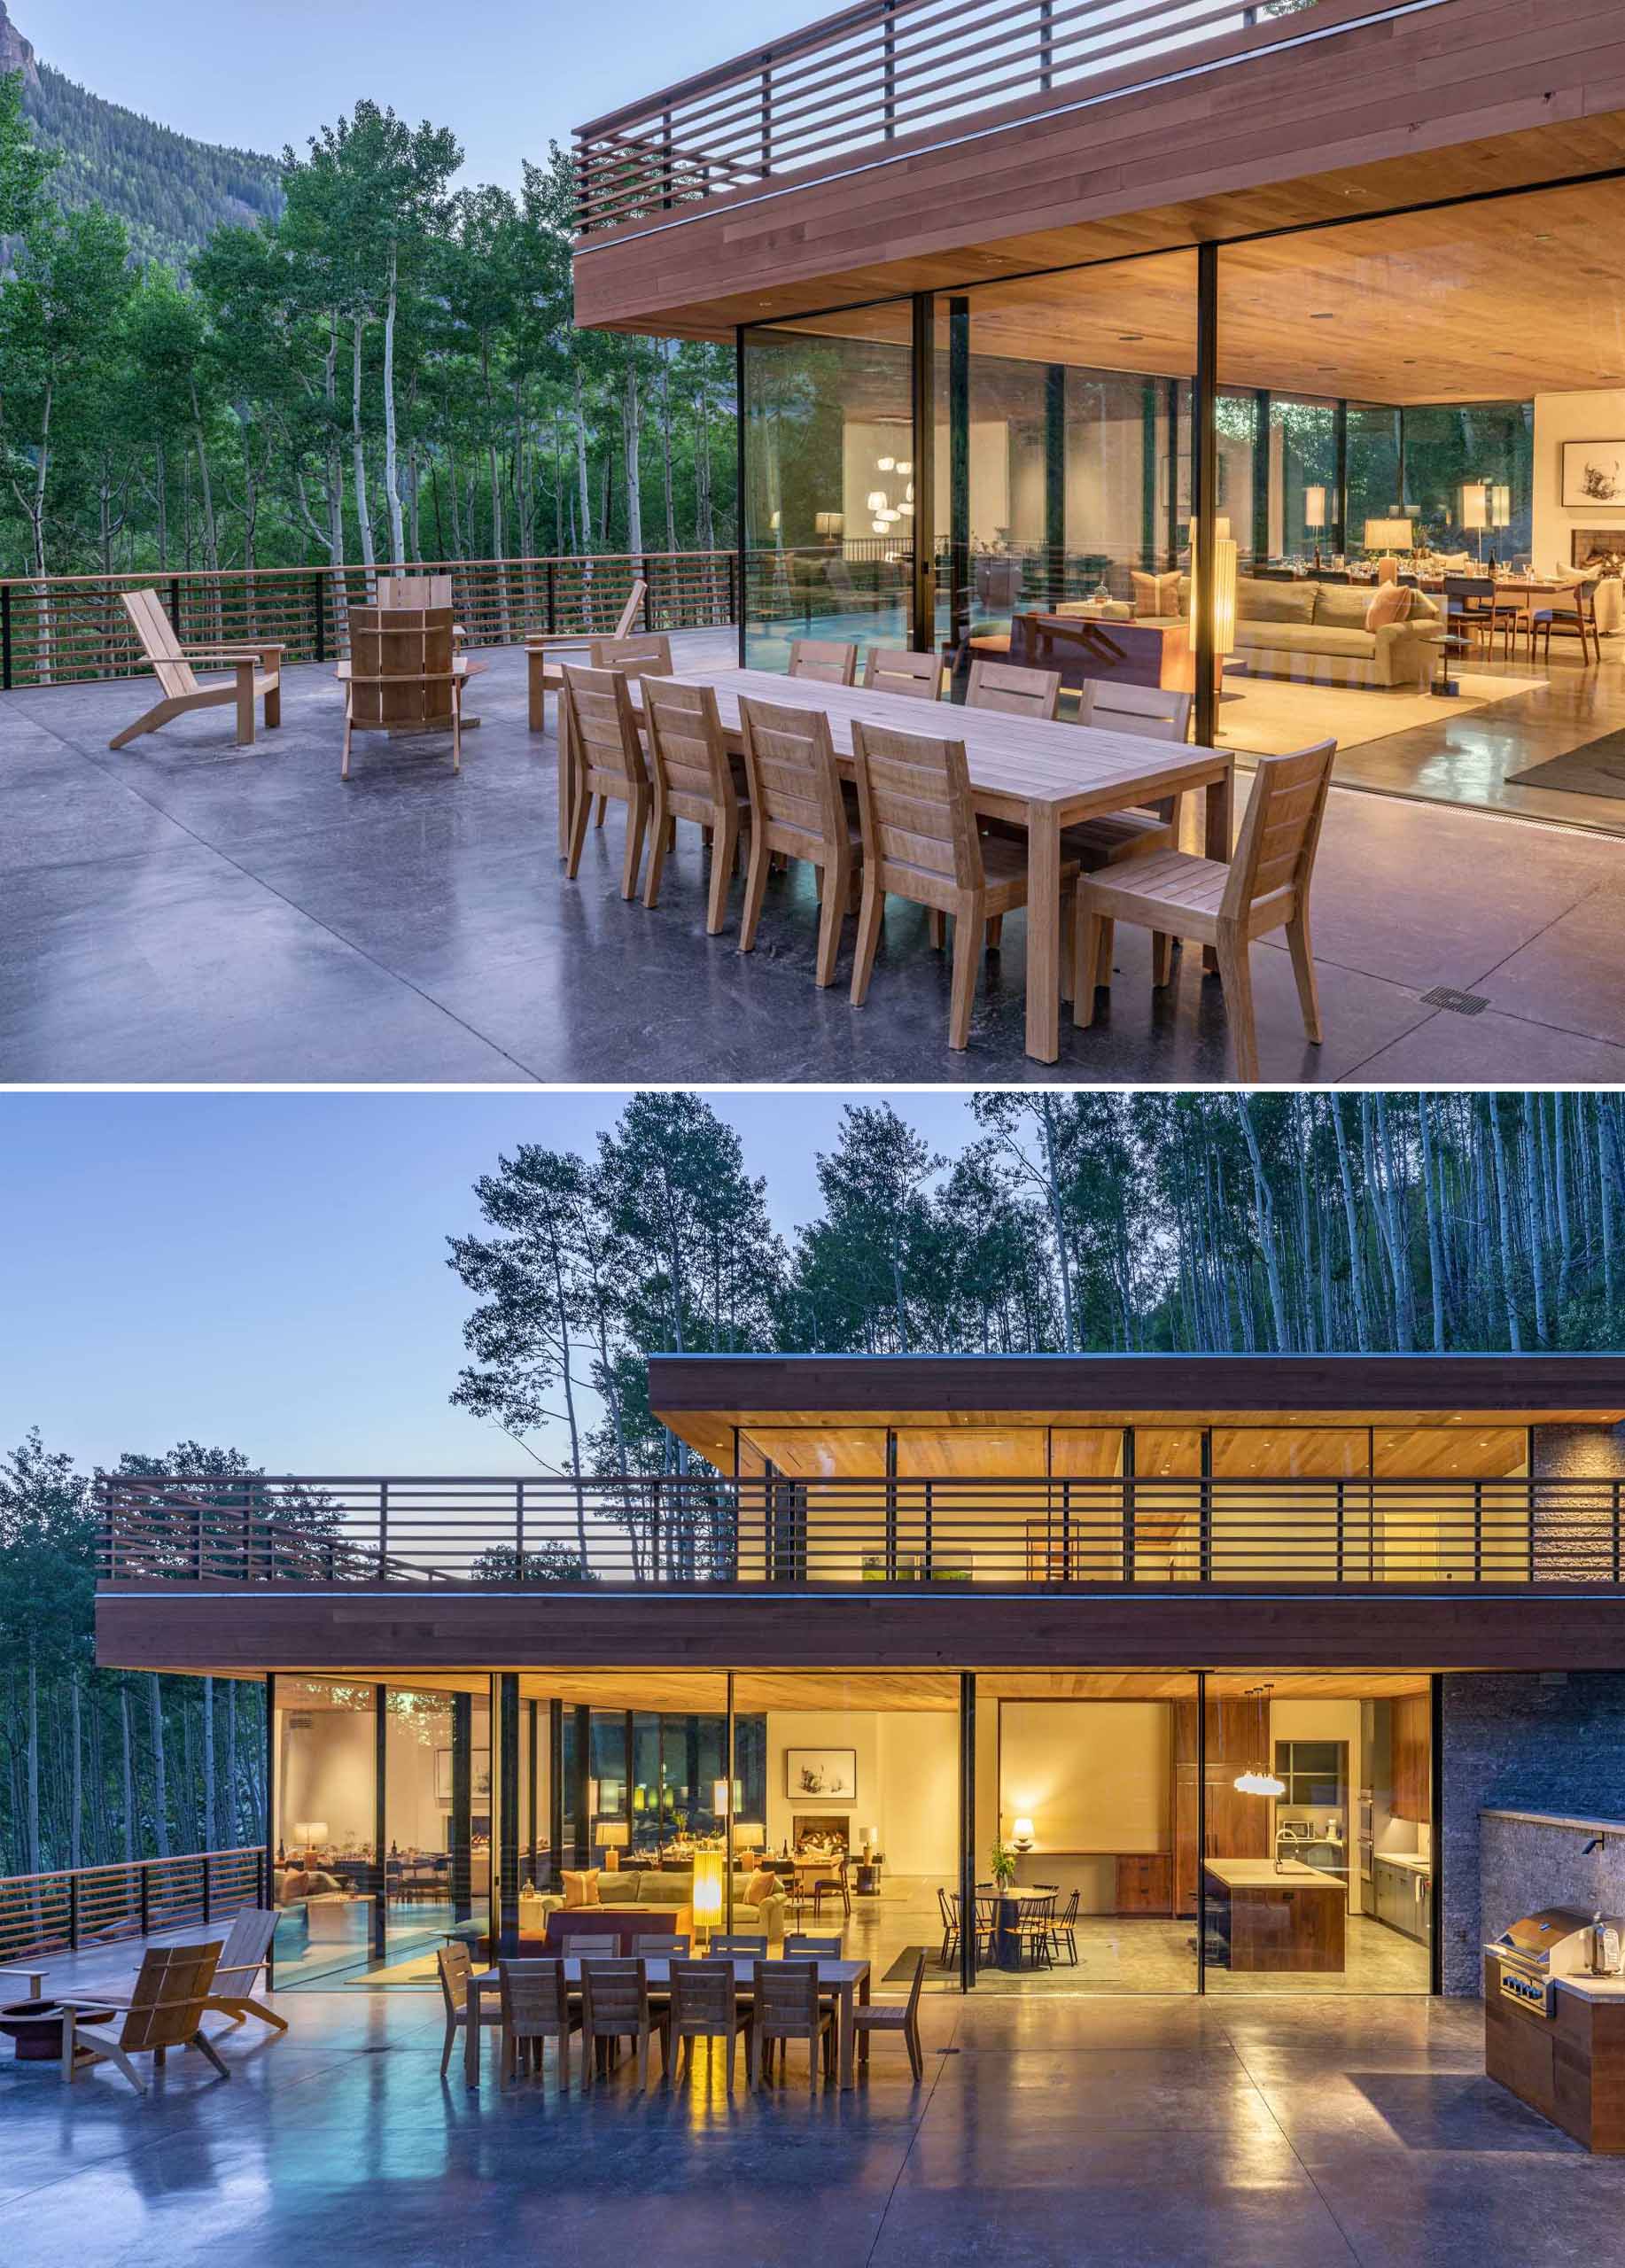 Sliding glass doors open the living spaces to the outdoor decks that are furnished with a table for outdoor dining, a fire bowl with surrounding seating, and a BBQ.